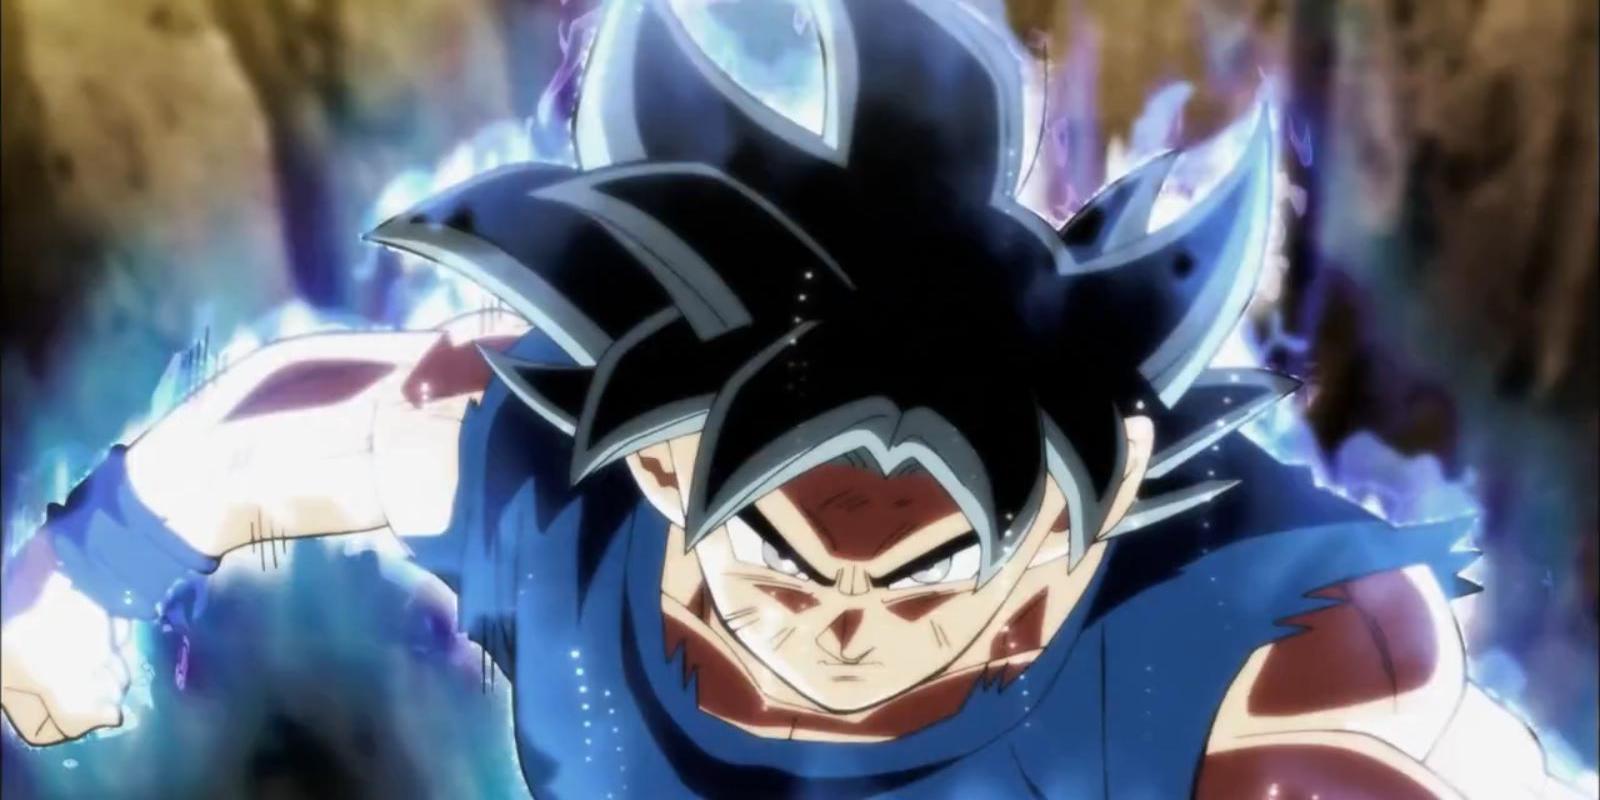 What is the age of Goku In The Universal Survival Saga?